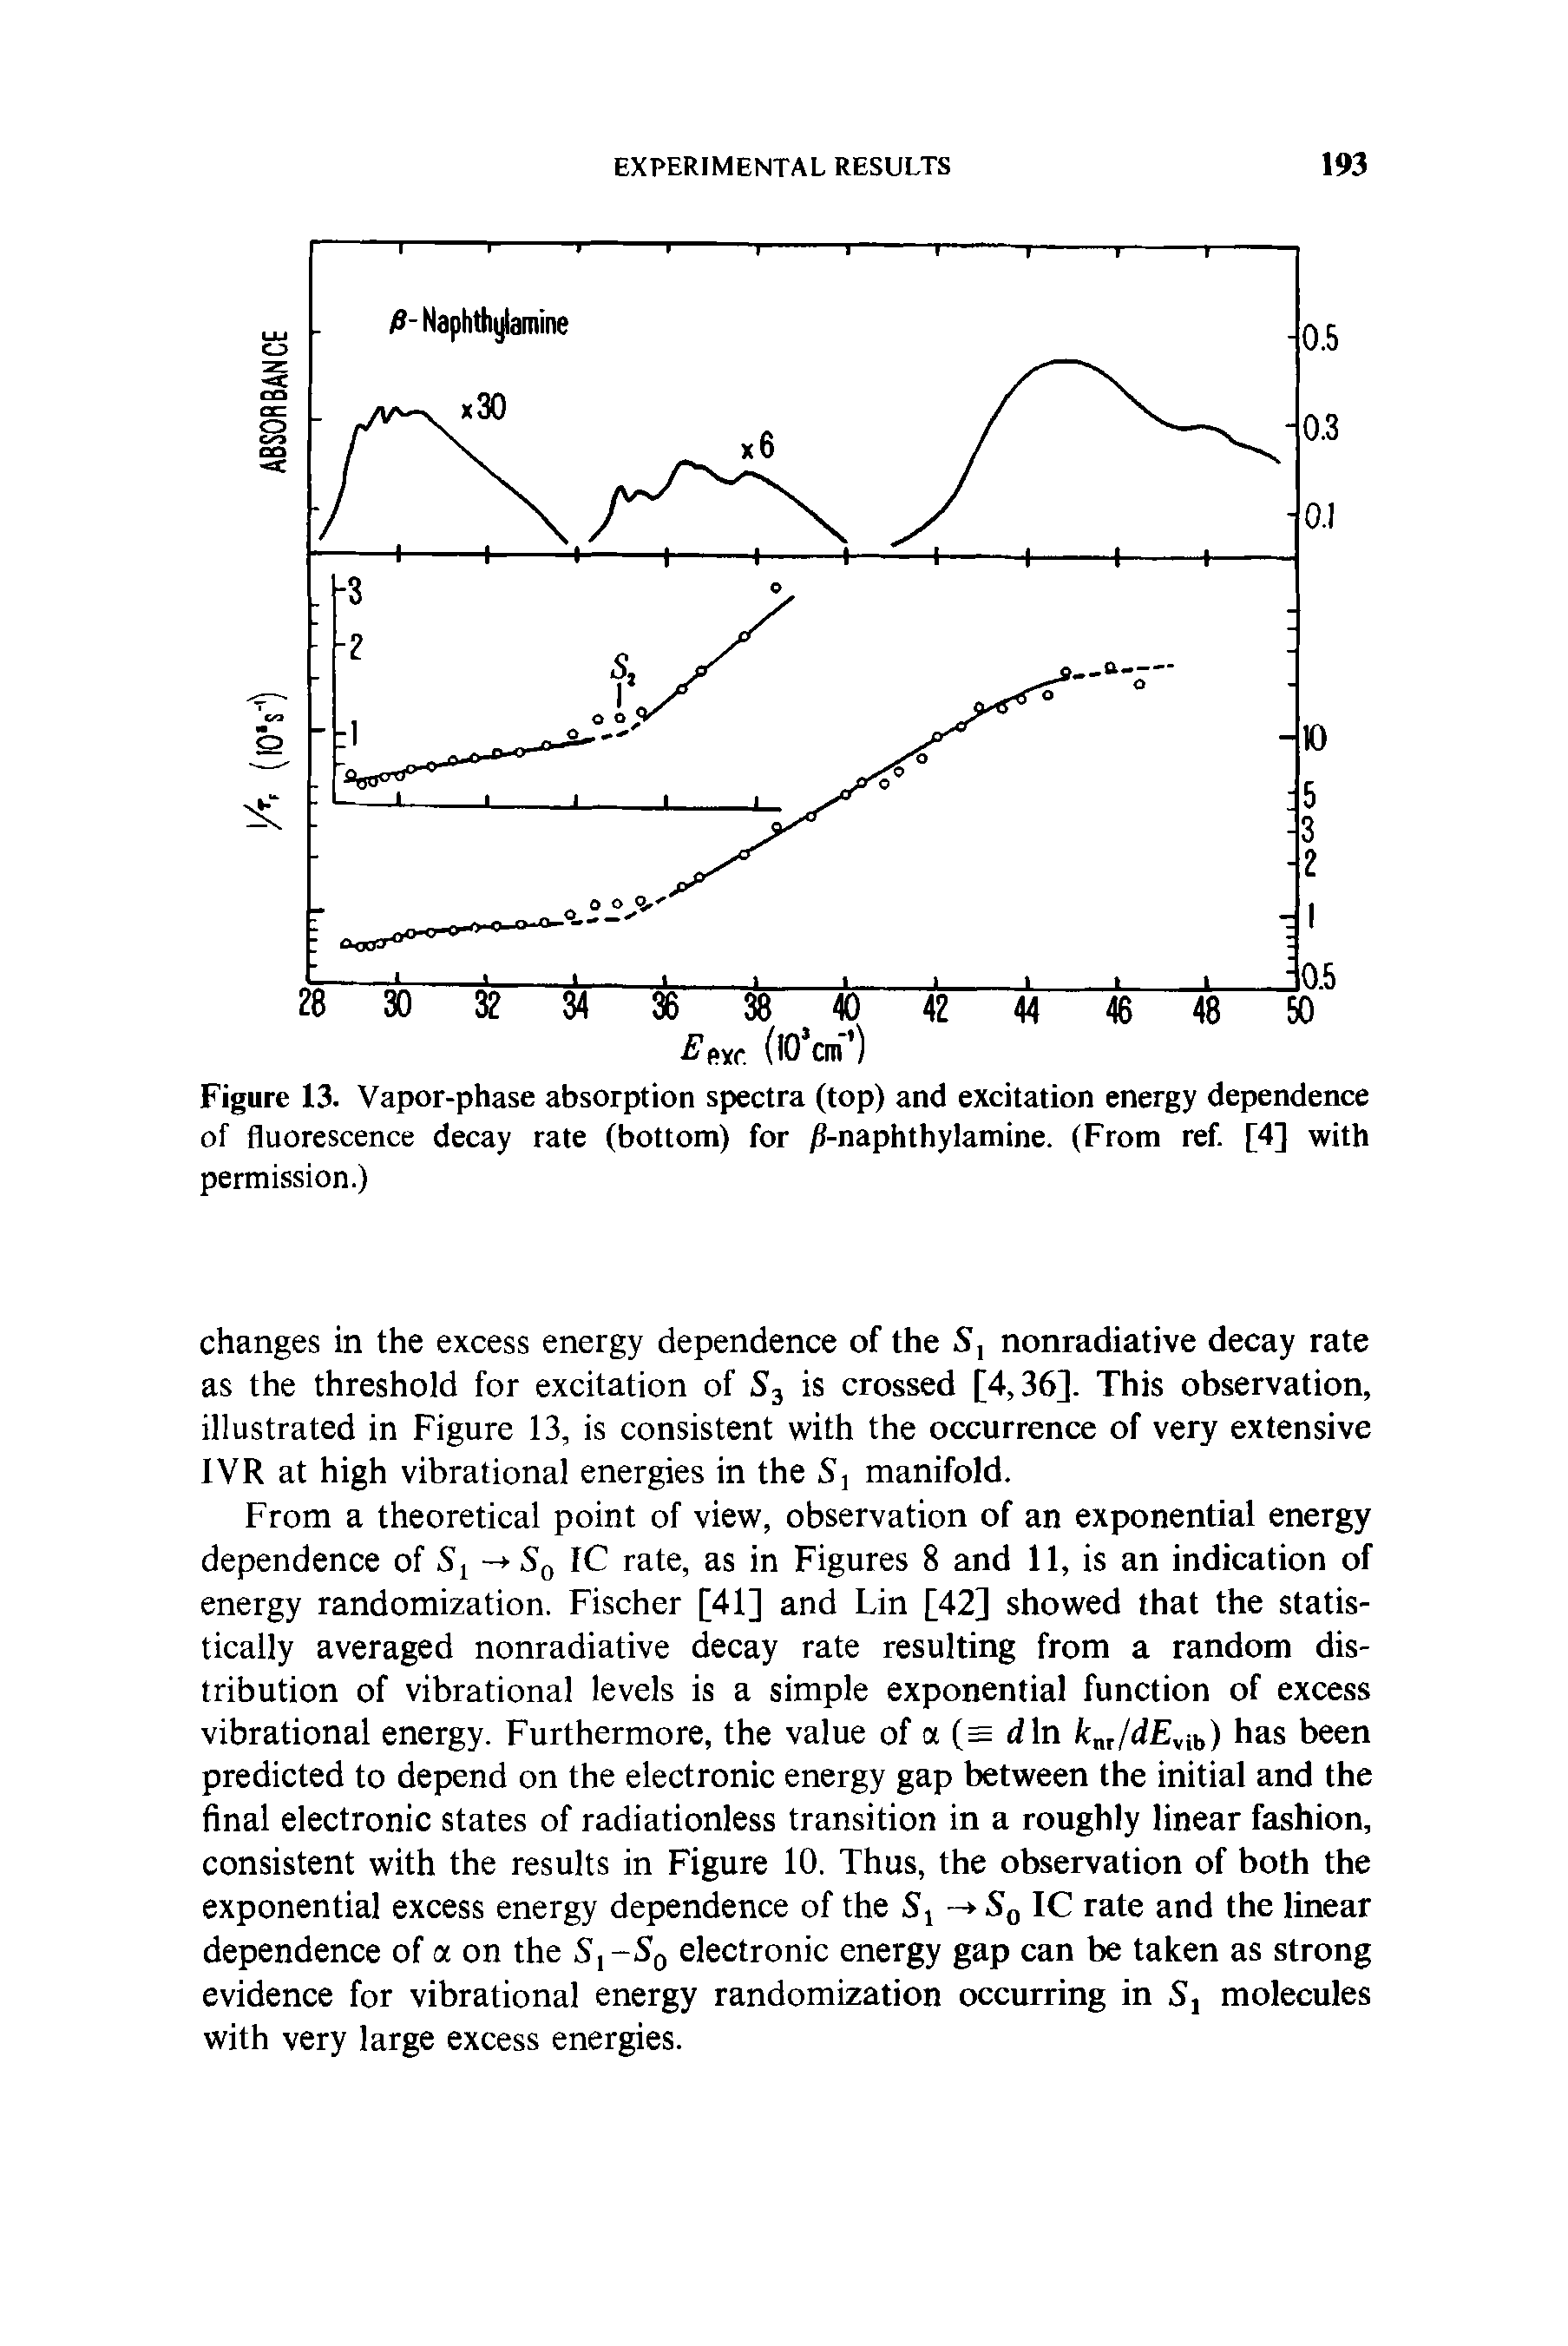 Figure 13. Vapor-phase absorption spectra (top) and excitation energy dependence of fluorescence decay rate (bottom) for /f-naphthylamine. (From ref. [4] with permission.)...